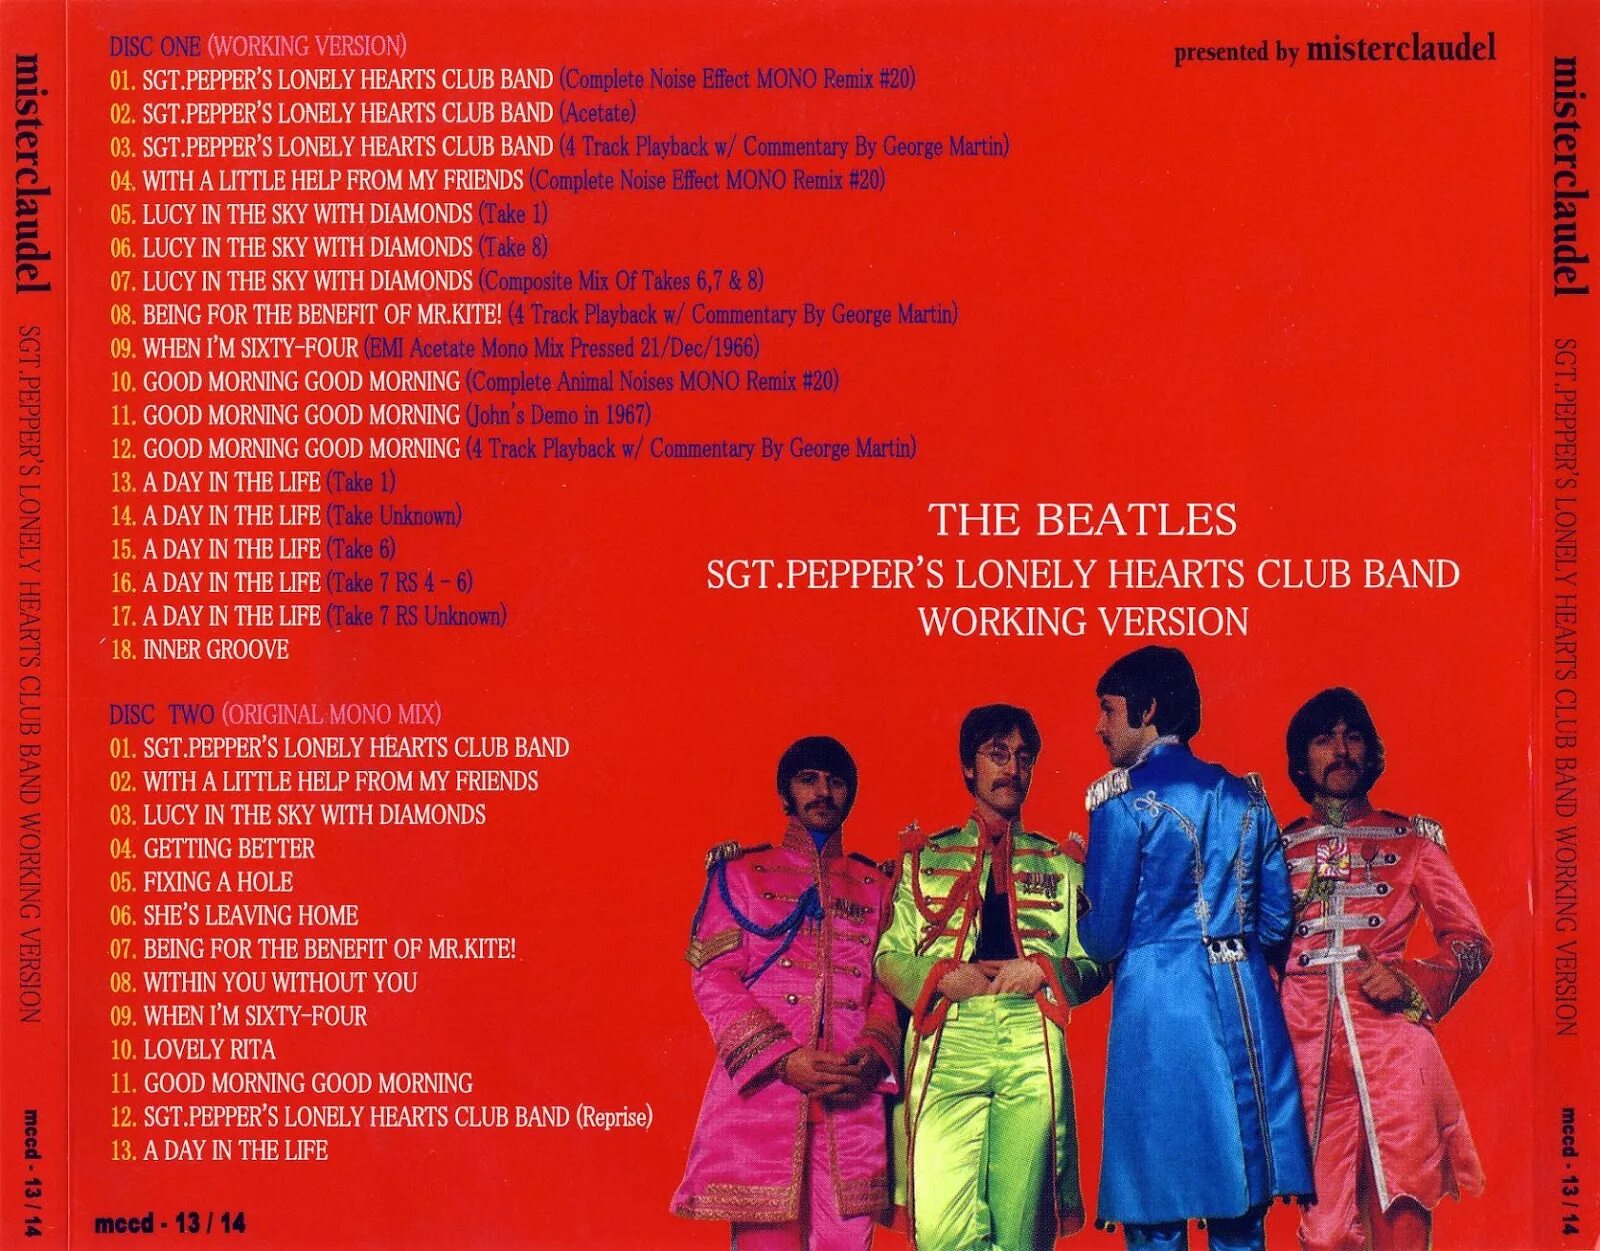 Mp3 pepper. The Beatles Sgt. Pepper's Lonely Hearts Club Band 1967. The Beatles Sgt. Pepper's Lonely Hearts Club Band обложка. Битлз сержант Пеппер. Beatles - Sgt. Pepper's Lonely Hearts Club Band (LP).